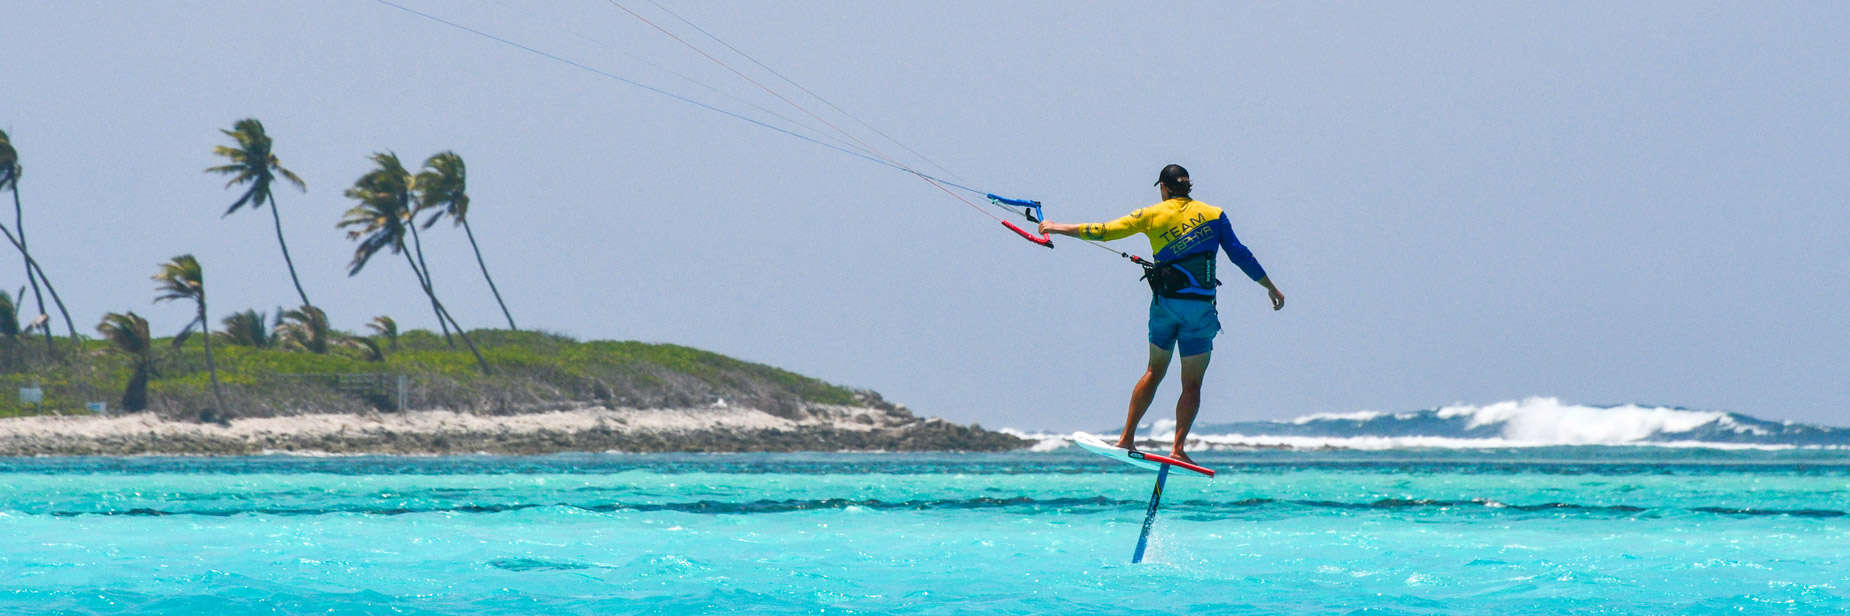 Kitesurfing Tips: How to ride a foil board